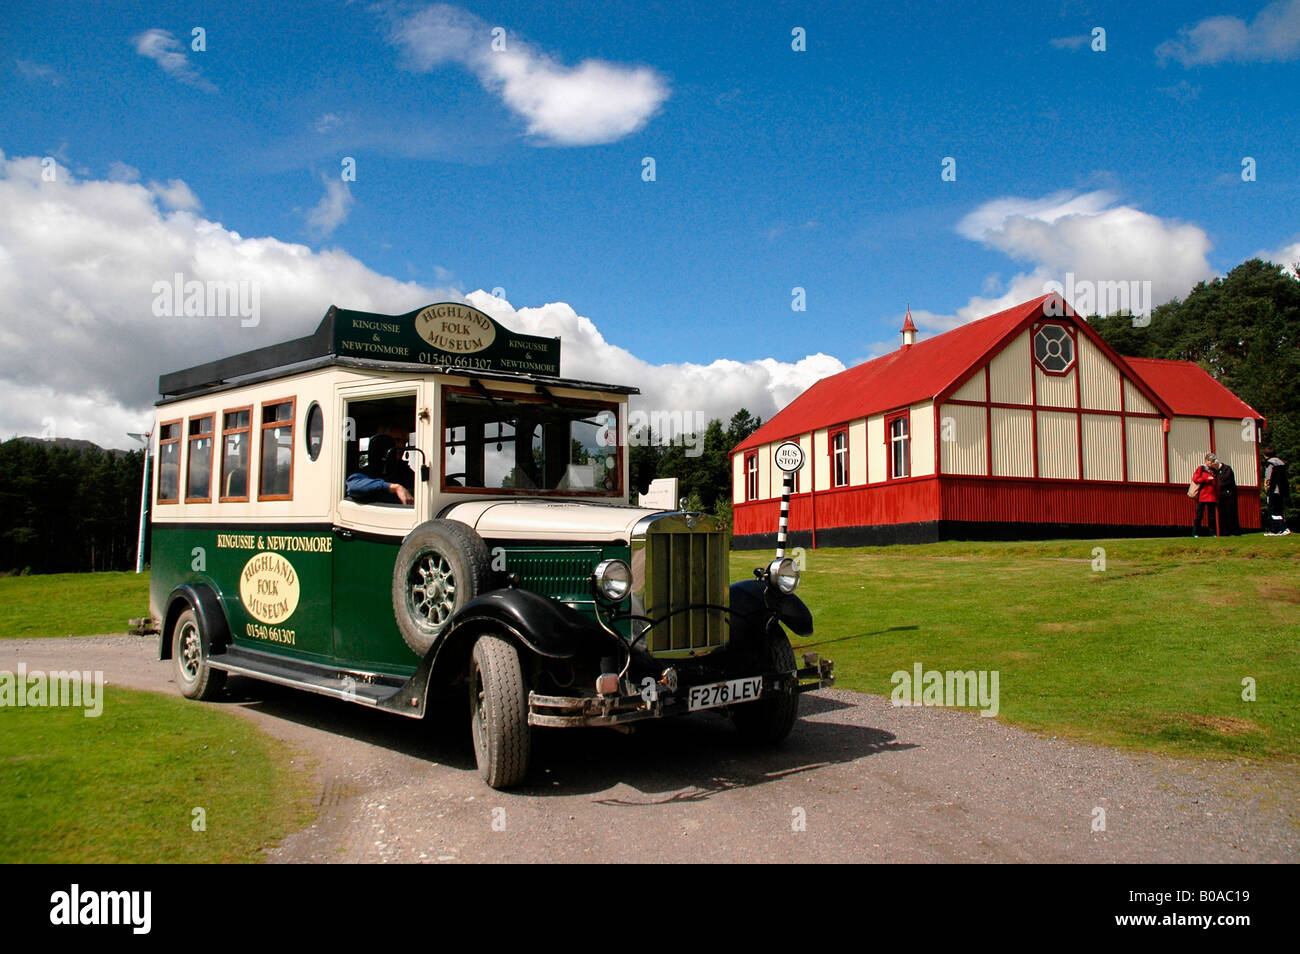 the Highland Folk Museum Kingussie and Newtonmore .An old replica bus and church in the back ground. Stock Photo